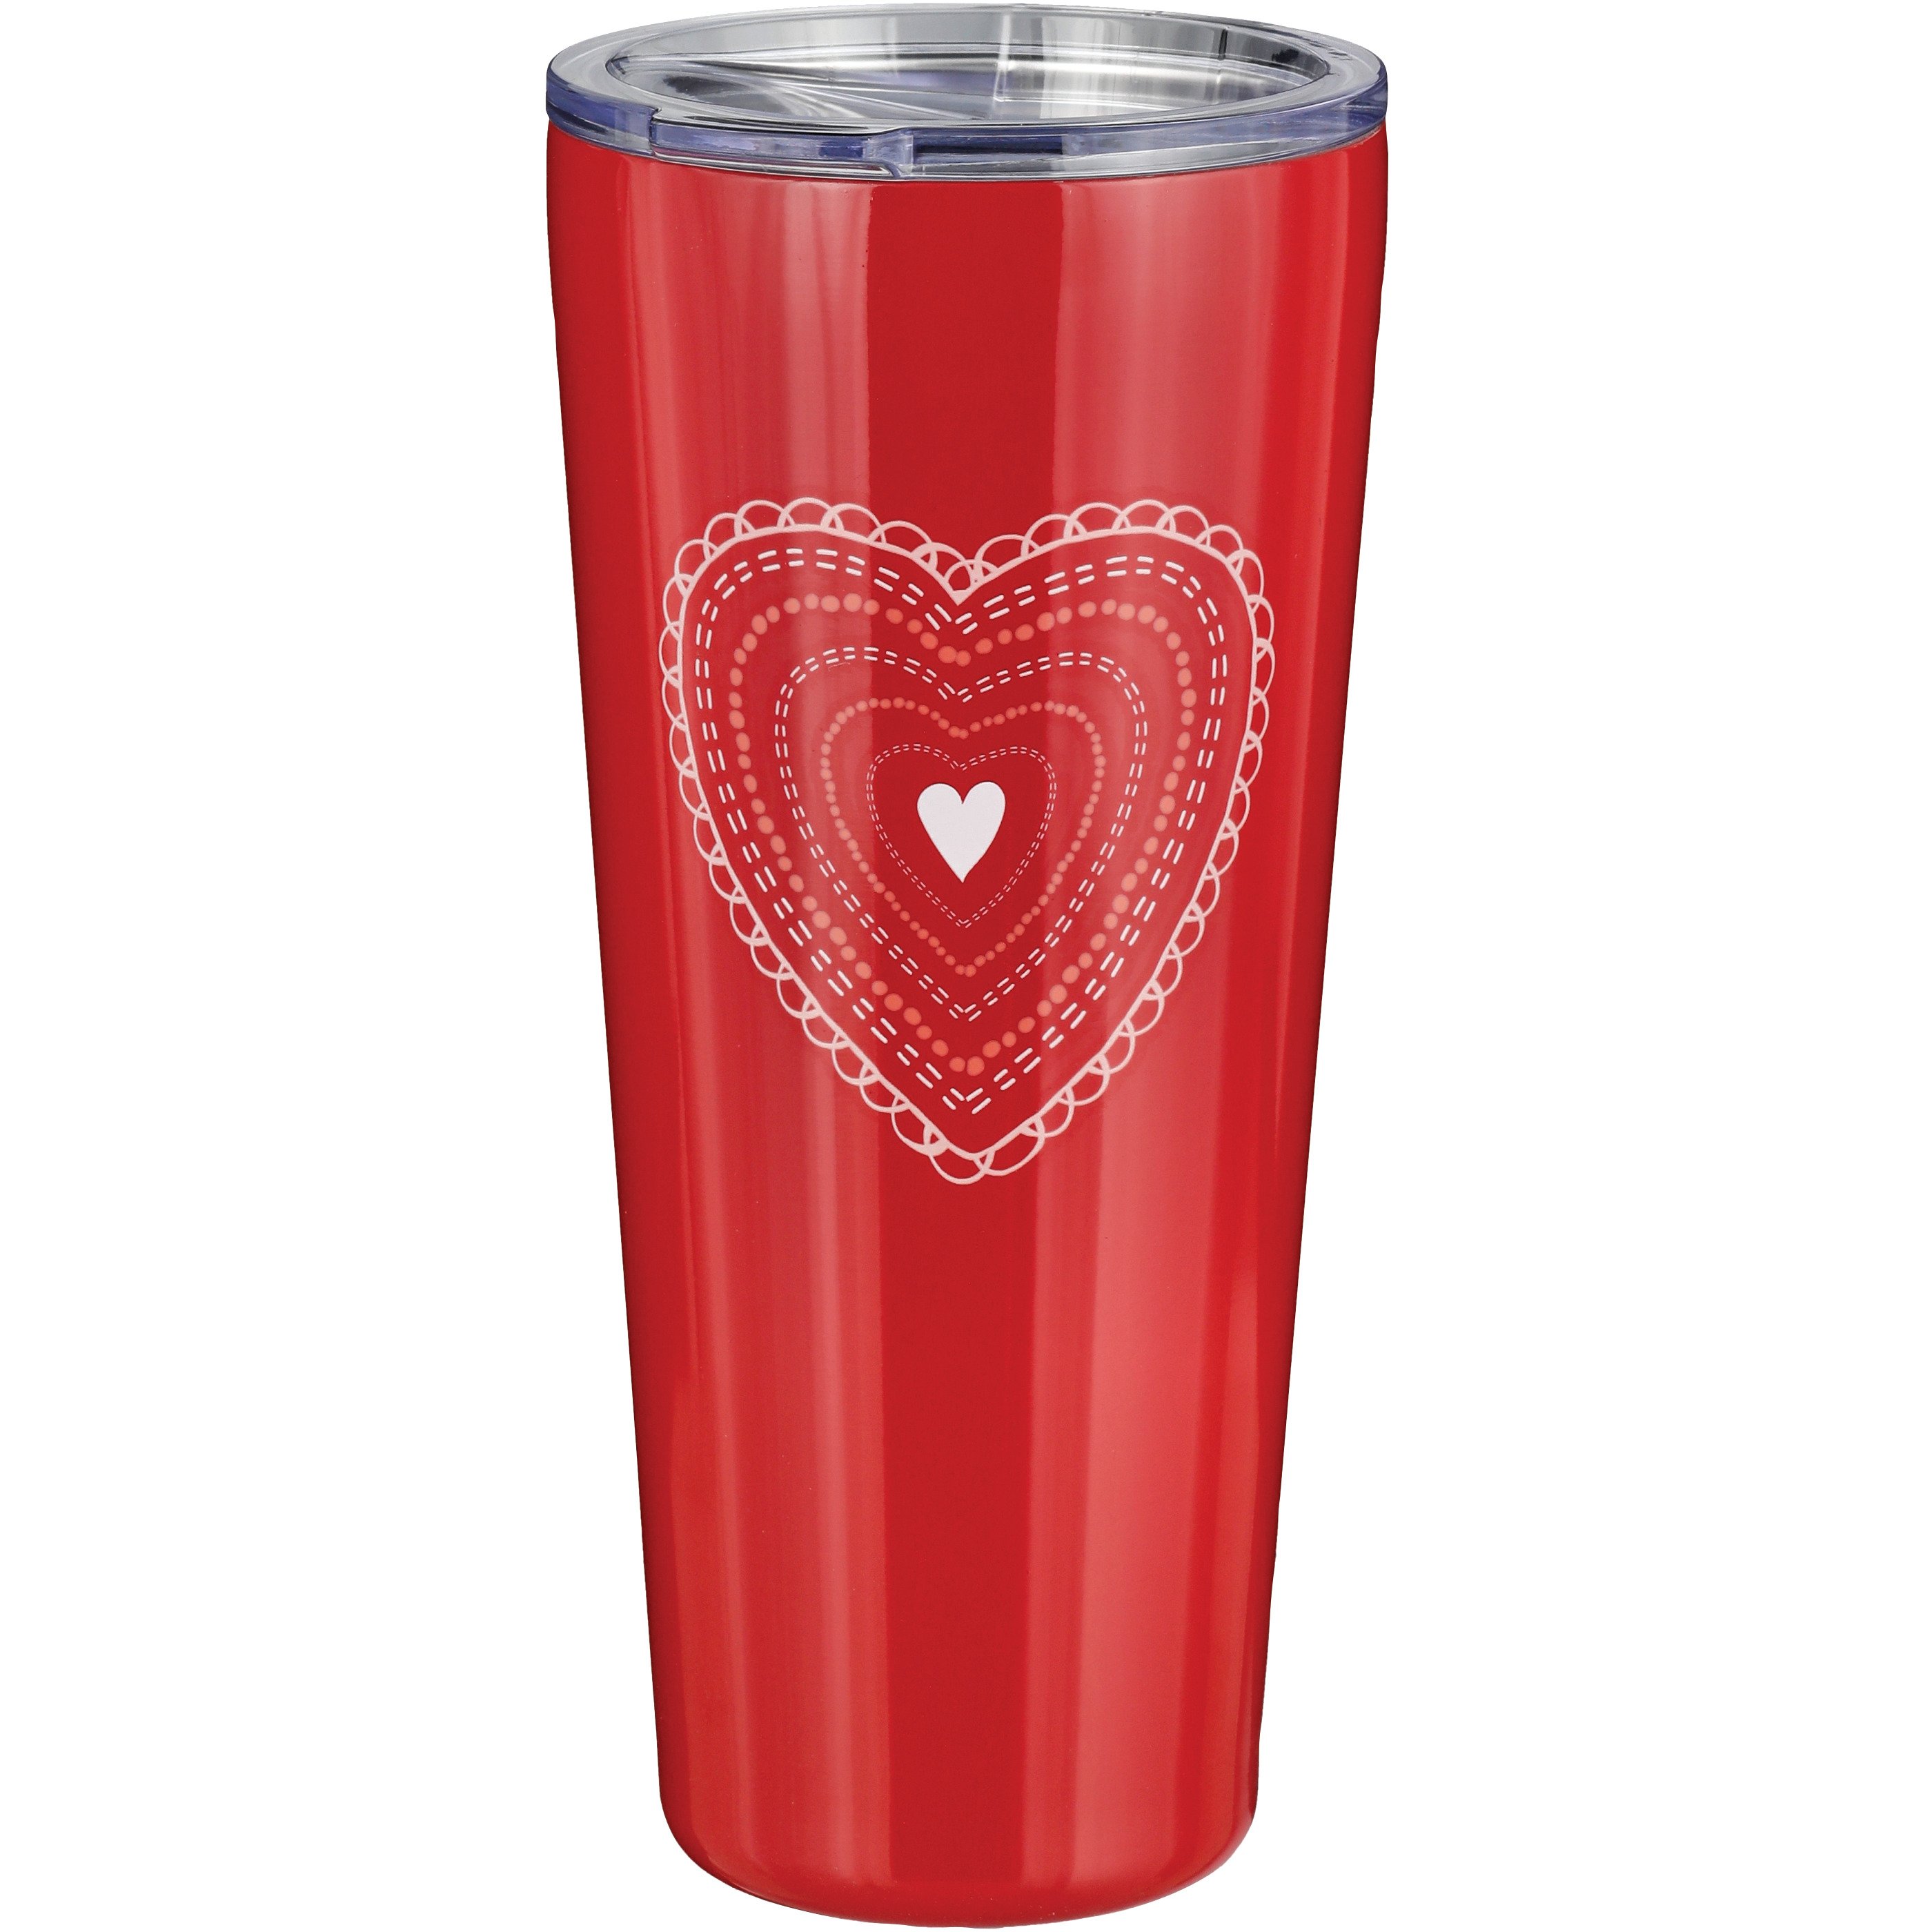 Destination Holiday Doily Hearts Stainless Steel Valentine Tumbler